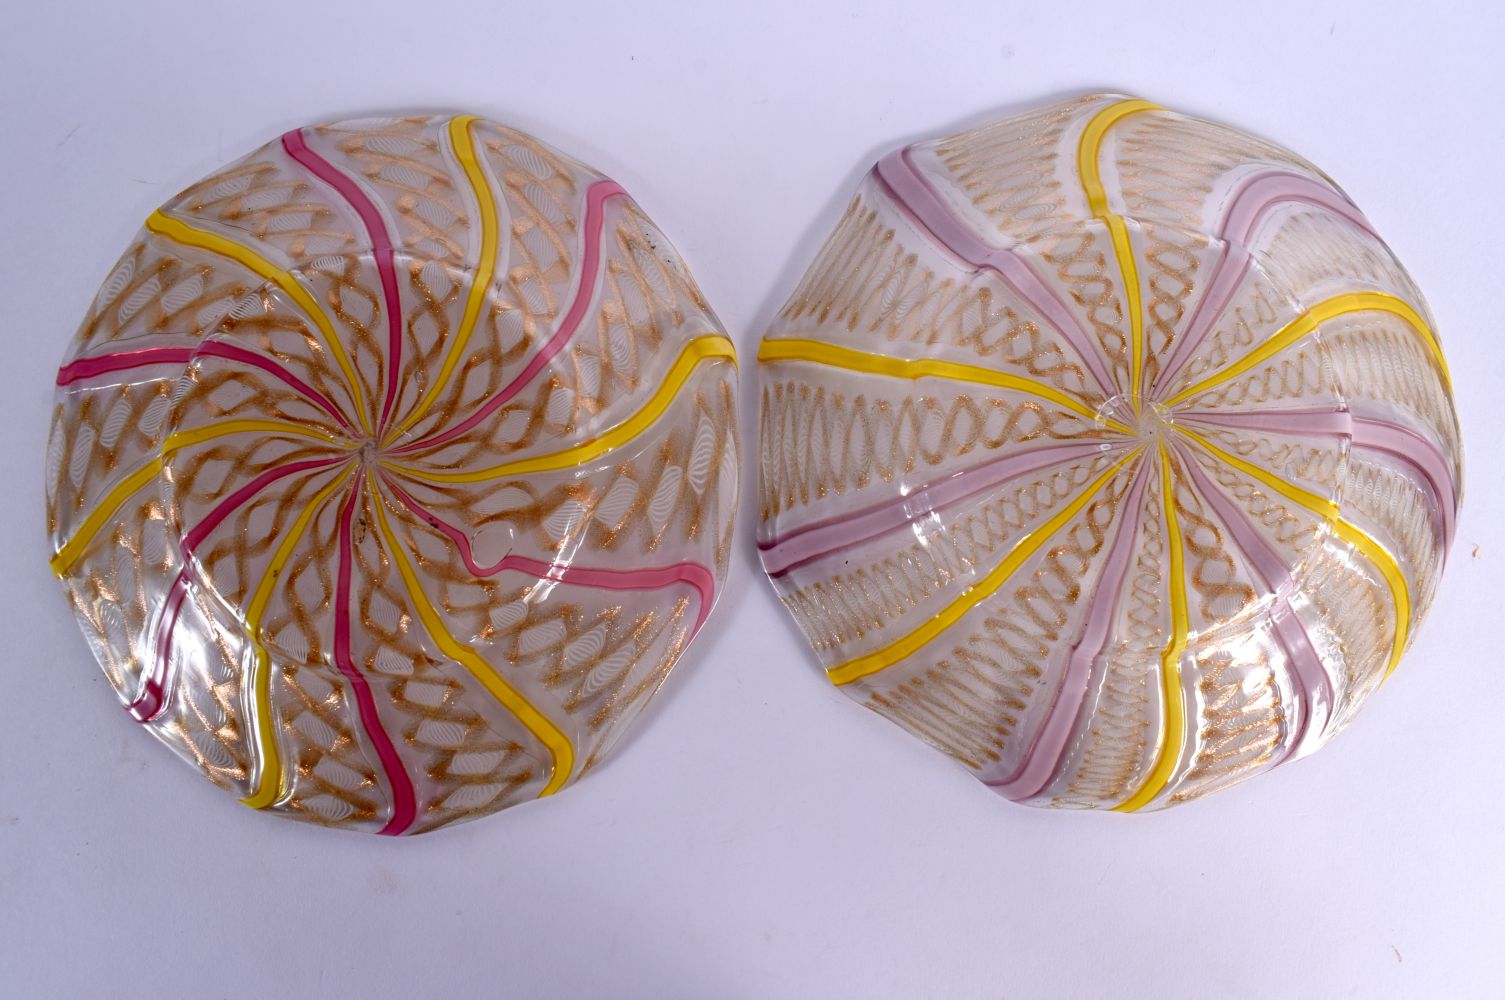 AN UNUSUAL PAIR OF EARLY 20TH CENTURY GLASS TWIST PLATES with pink swirling decoration. 19 cm wide. - Bild 2 aus 2